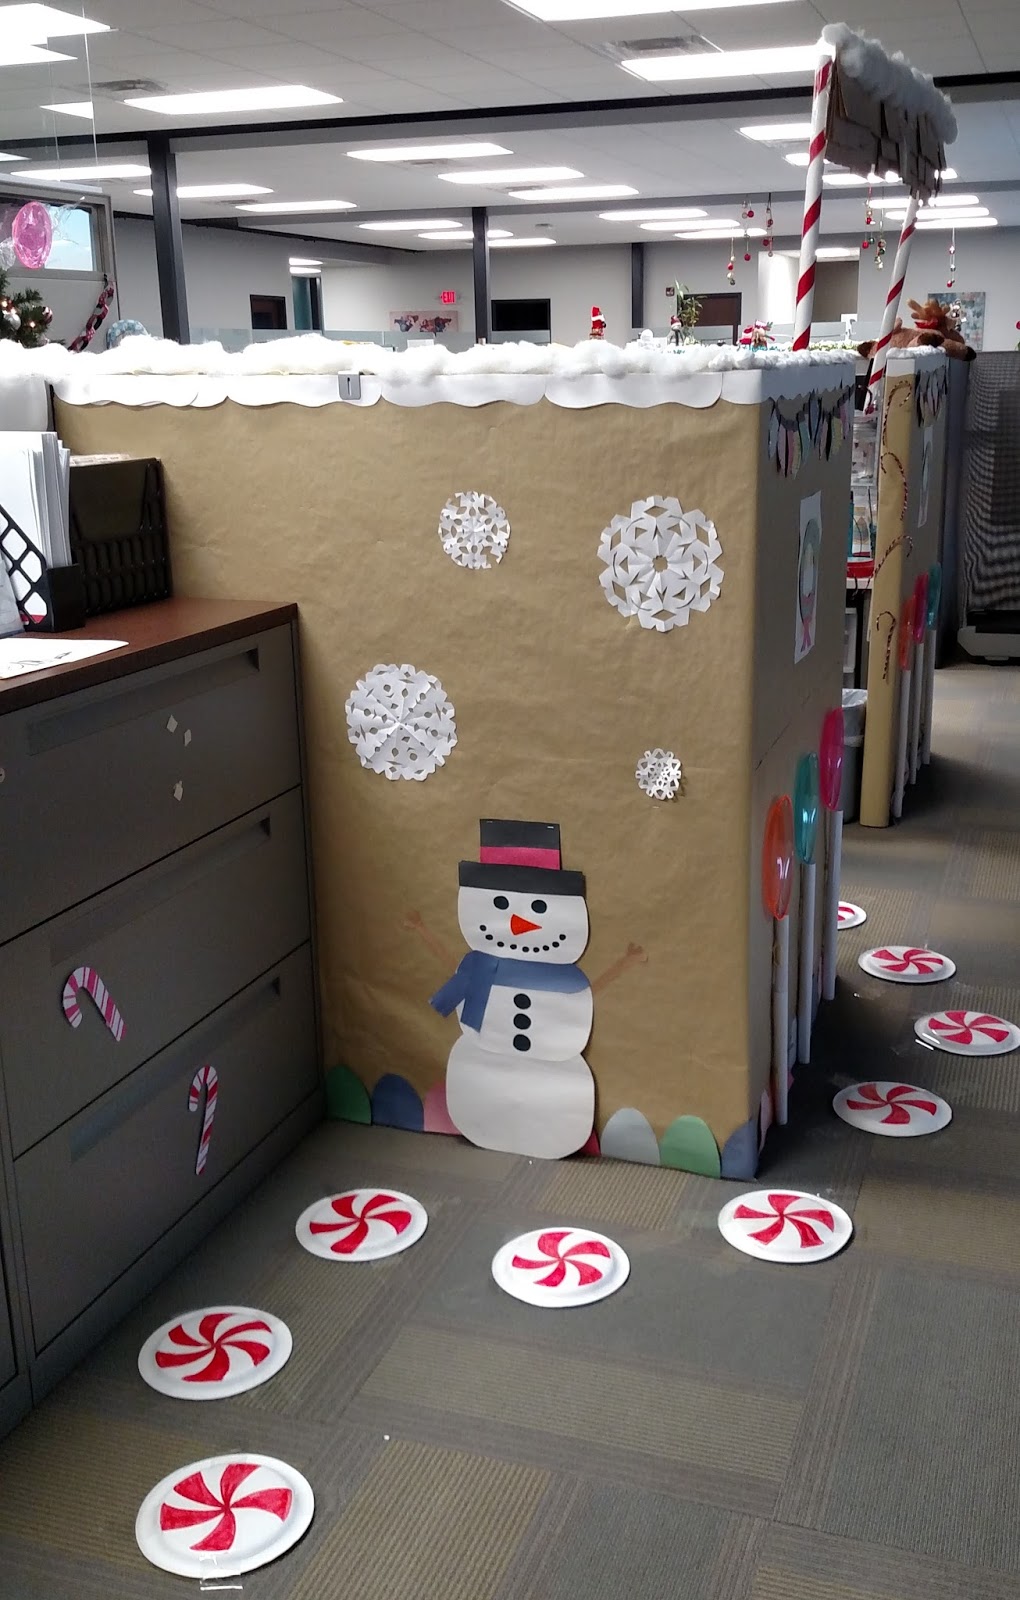 Erin's Crafty Endeavors: Cube decorating contest